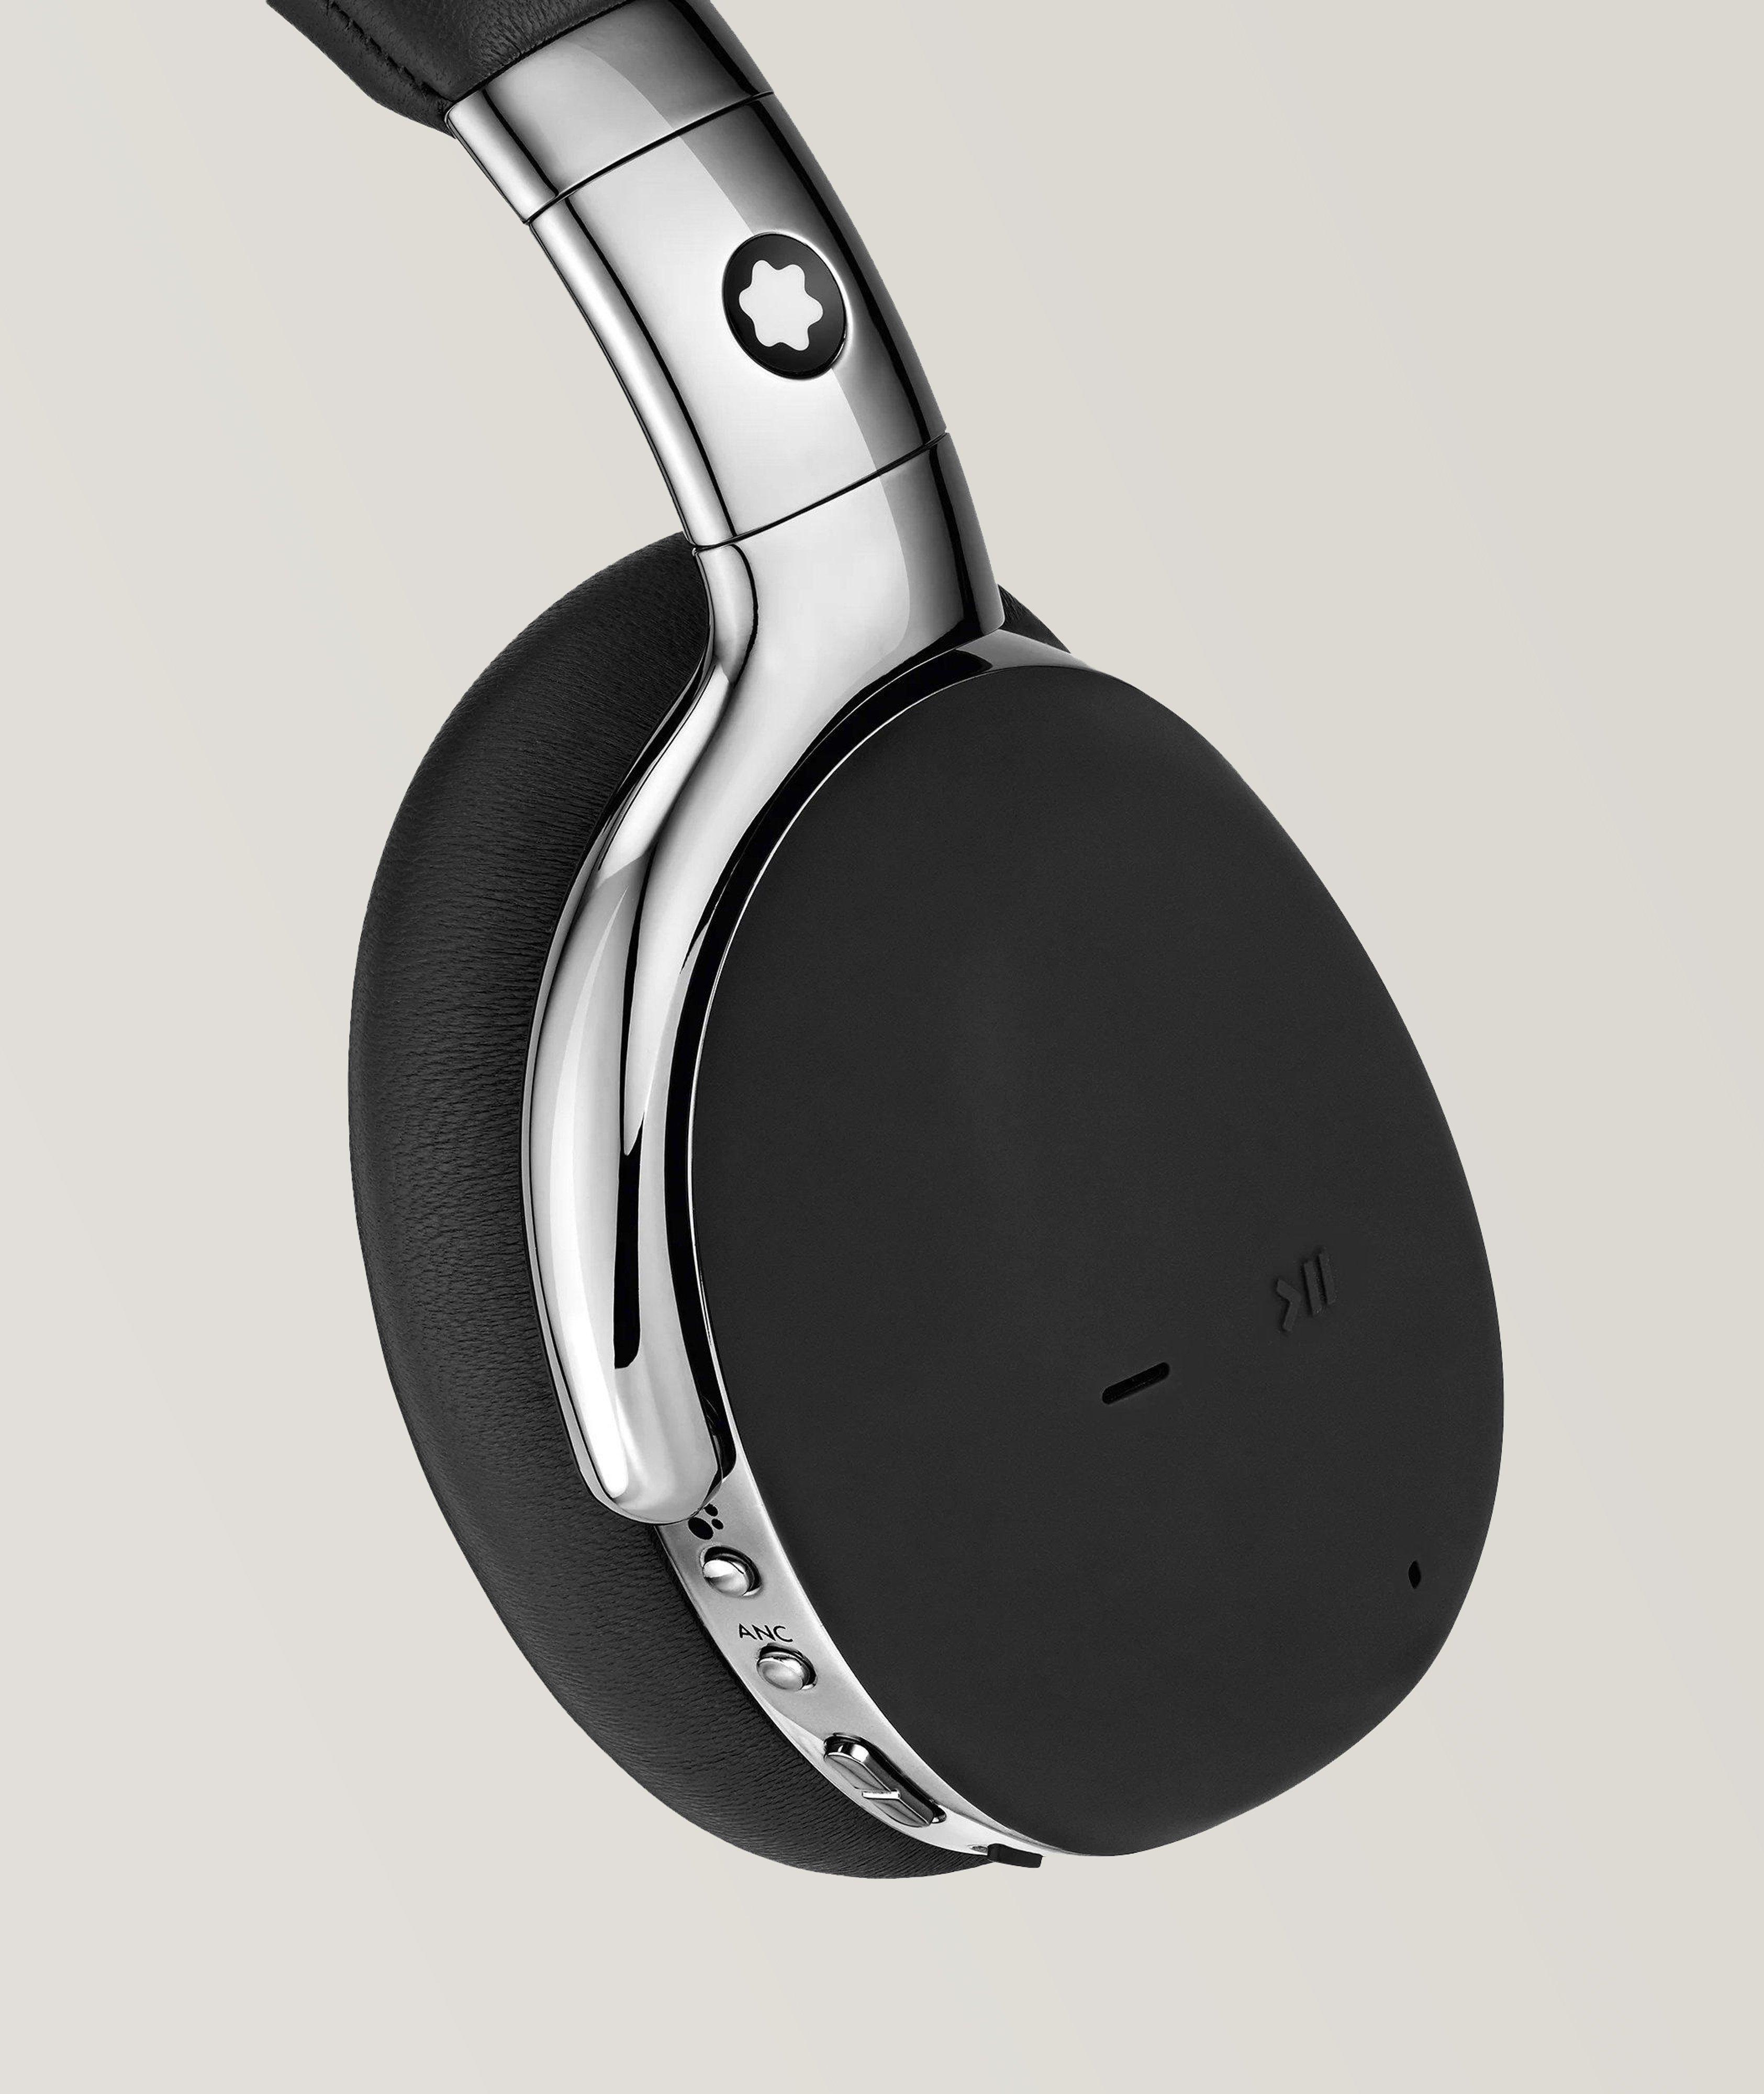 MB01 Over The Ear Wireless Headphones image 3